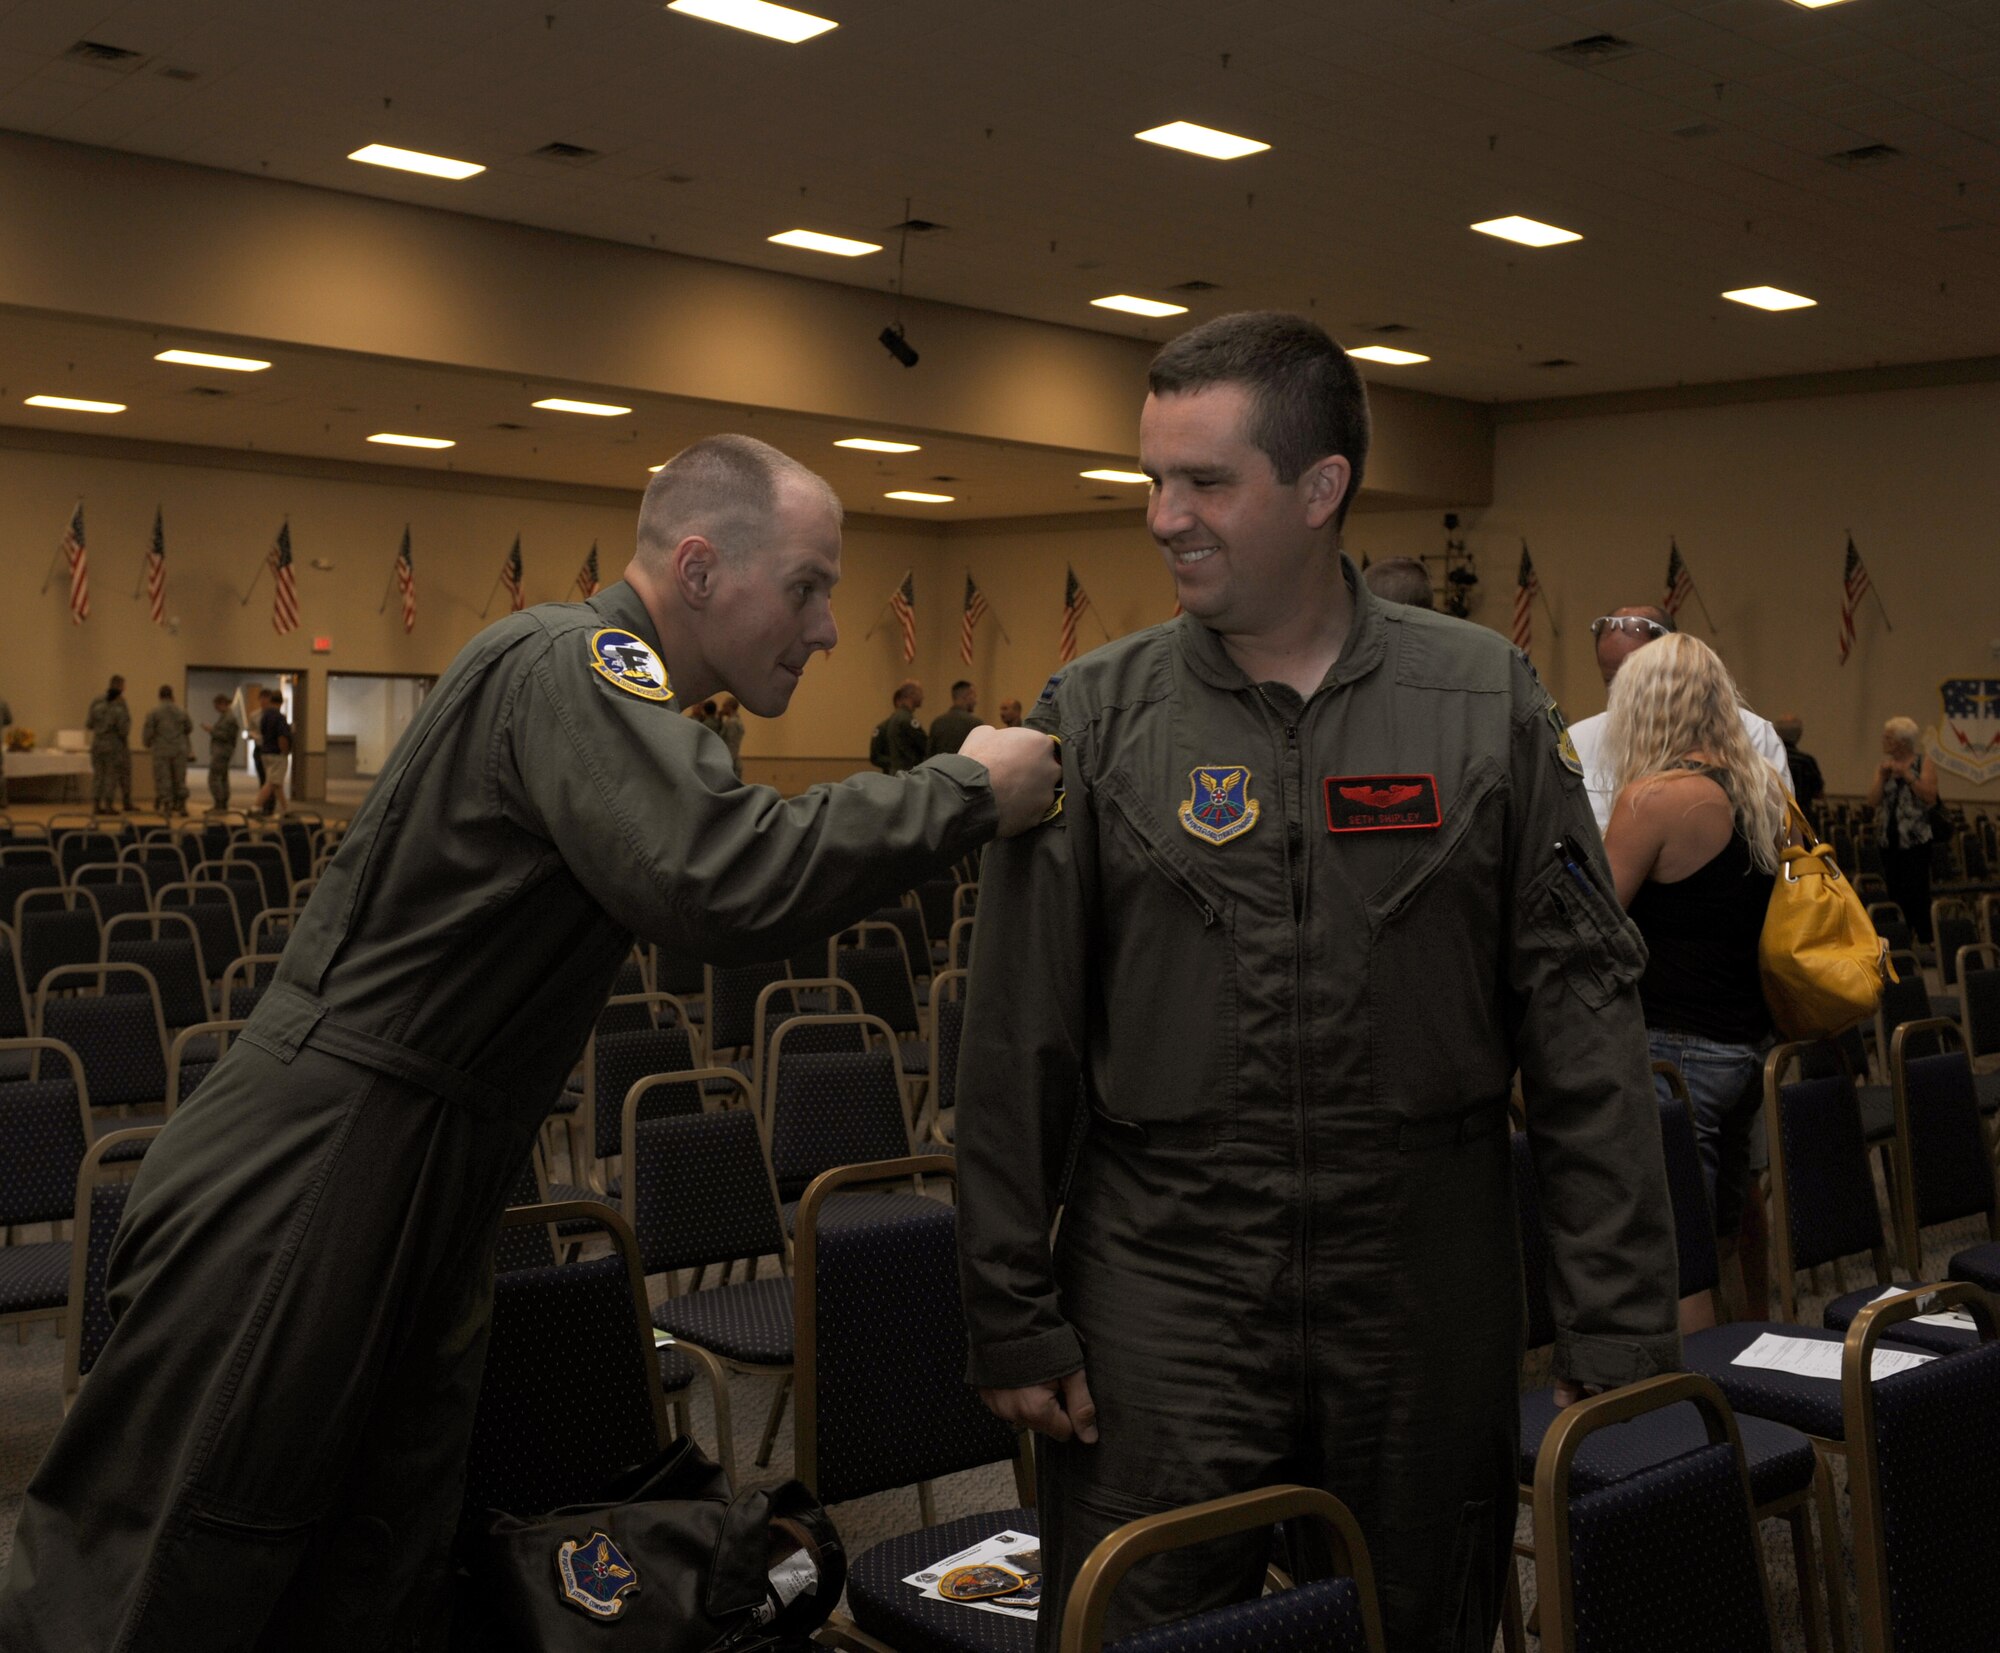 1st Lt. Paul Gabor, 11th Bomb Squadron Formal Training Unit, punches a unit patch on the flight suit of Capt. Seth Shipley, 96th Bomb Squadron, after graduating from his FTU class on Barksdale Air Force Base, La., July 10. FTU is a nine month course for pilots, navigators and electronic warfare officers out of their initial flight training. The course consists of academic studies, simulators and flight training where the students gain the experience and confidence to operate a B-52H Stratofortress. (U.S. Air Force photo/Airman 1st Class Benjamin Gonsier)(RELEASED)
